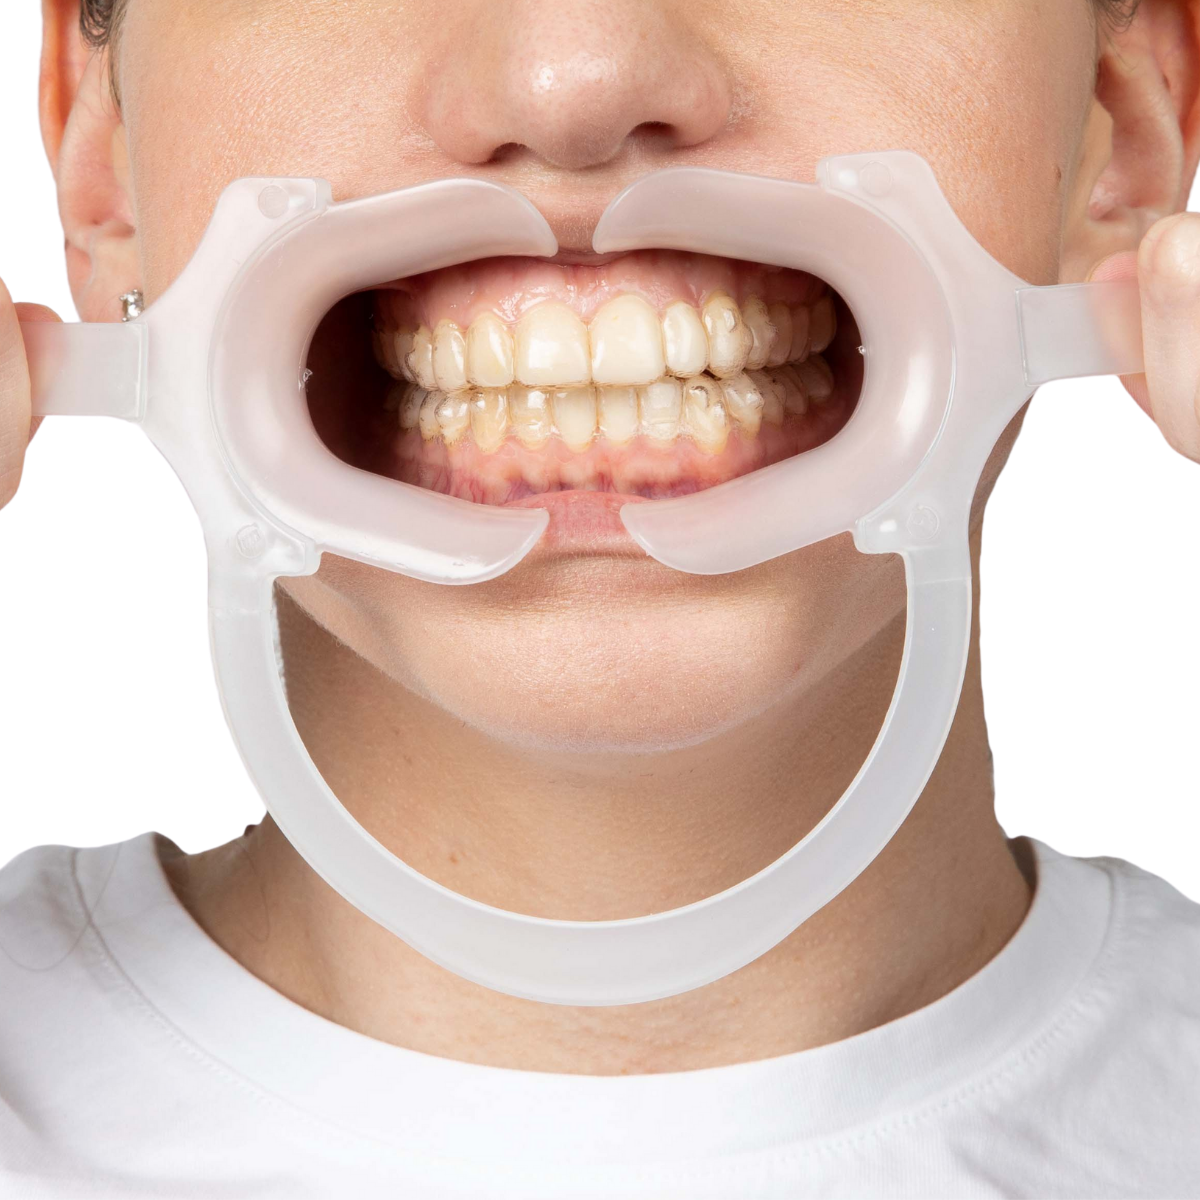 Hands Free Pro Retractors in mouth